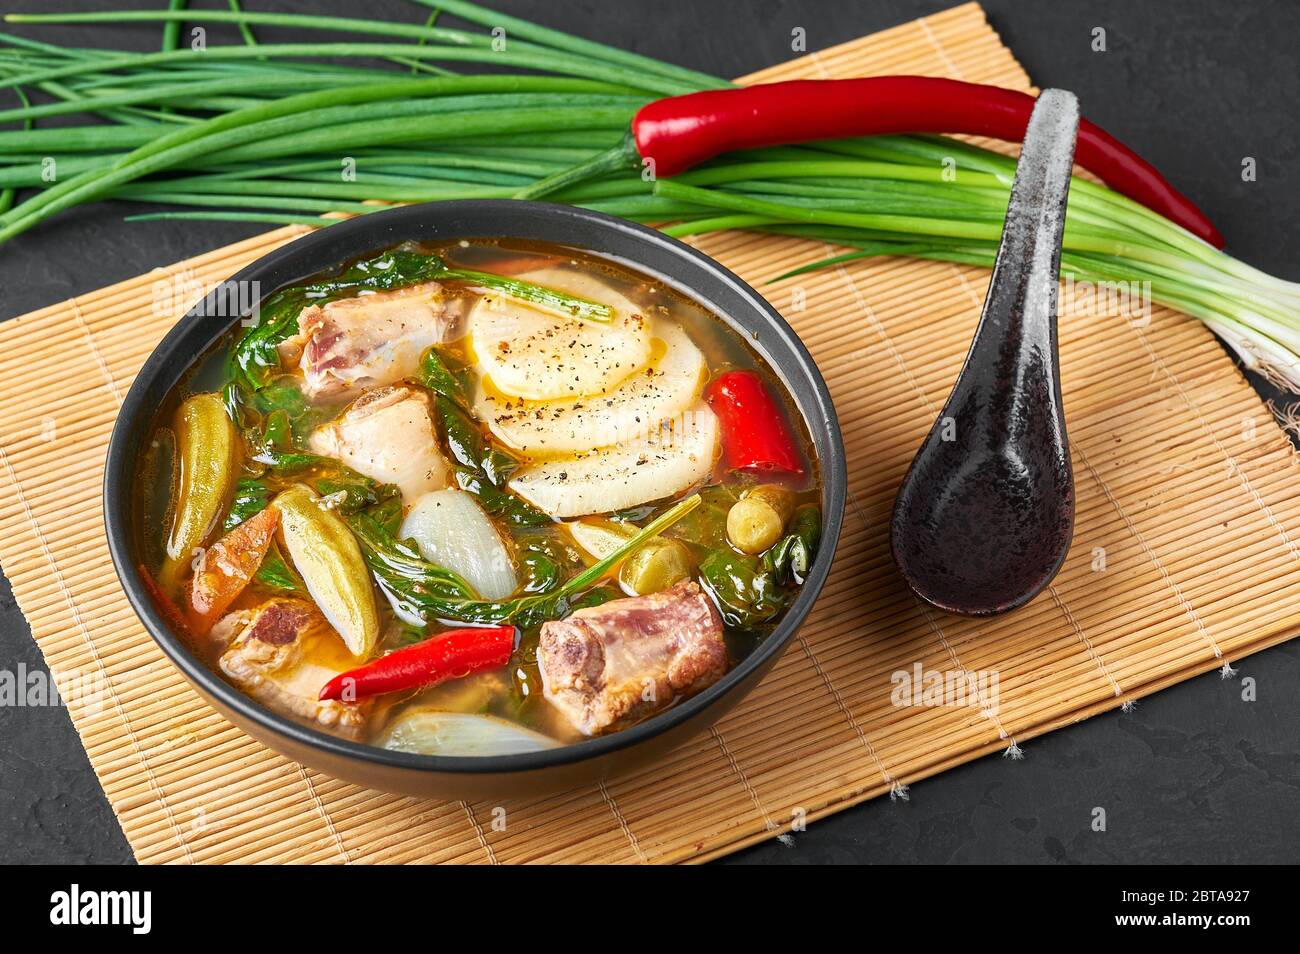 Pork Sinigang High Resolution Stock Photography and Images - Alamy